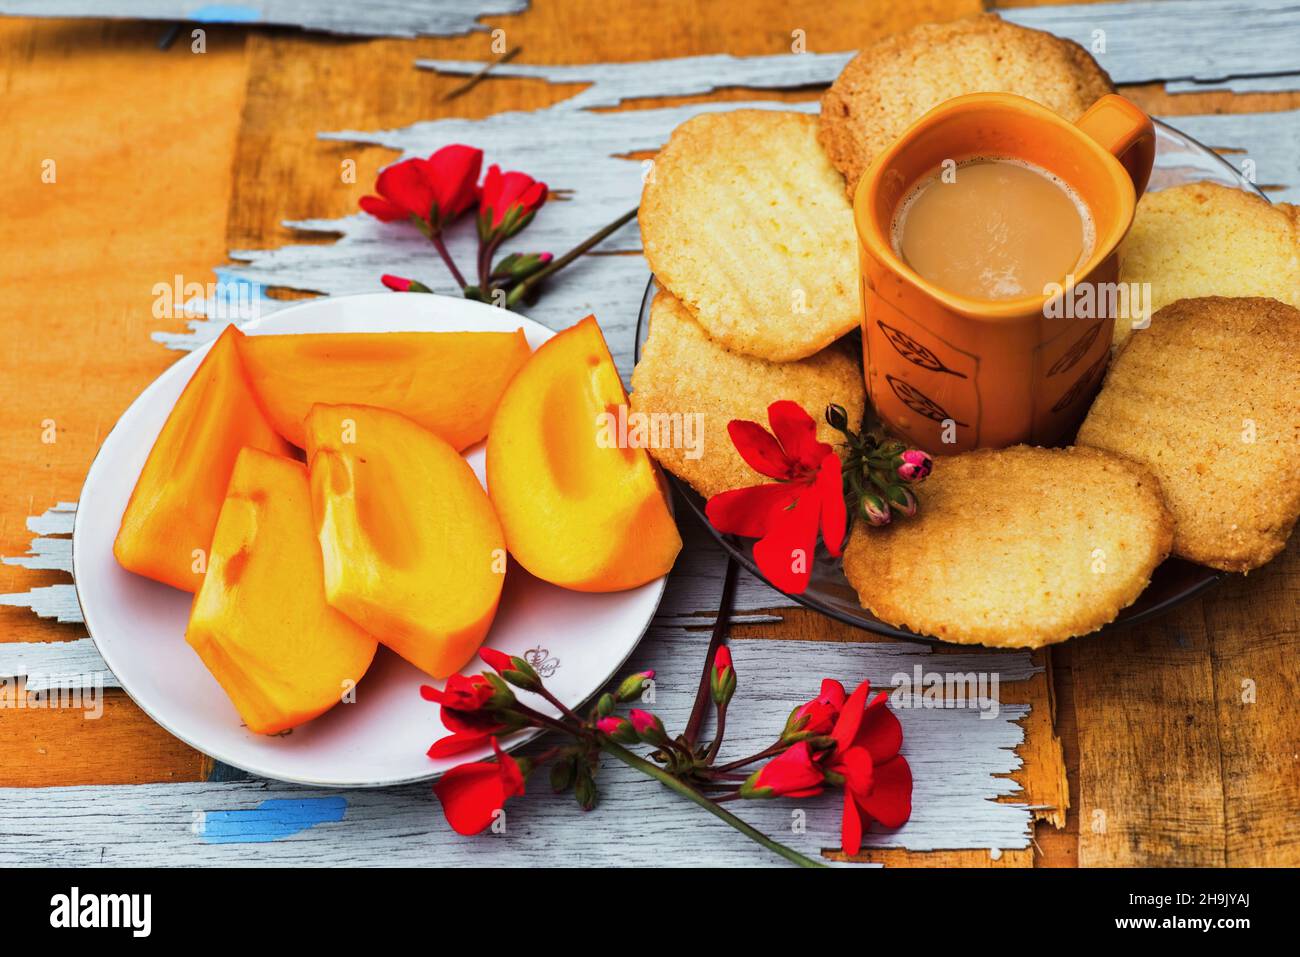 Sliced kaki fruit on plate, butter cookie, orange cup of coffee and red flower on scratched wooden table. Sweet food arrangement orange color. Stock Photo